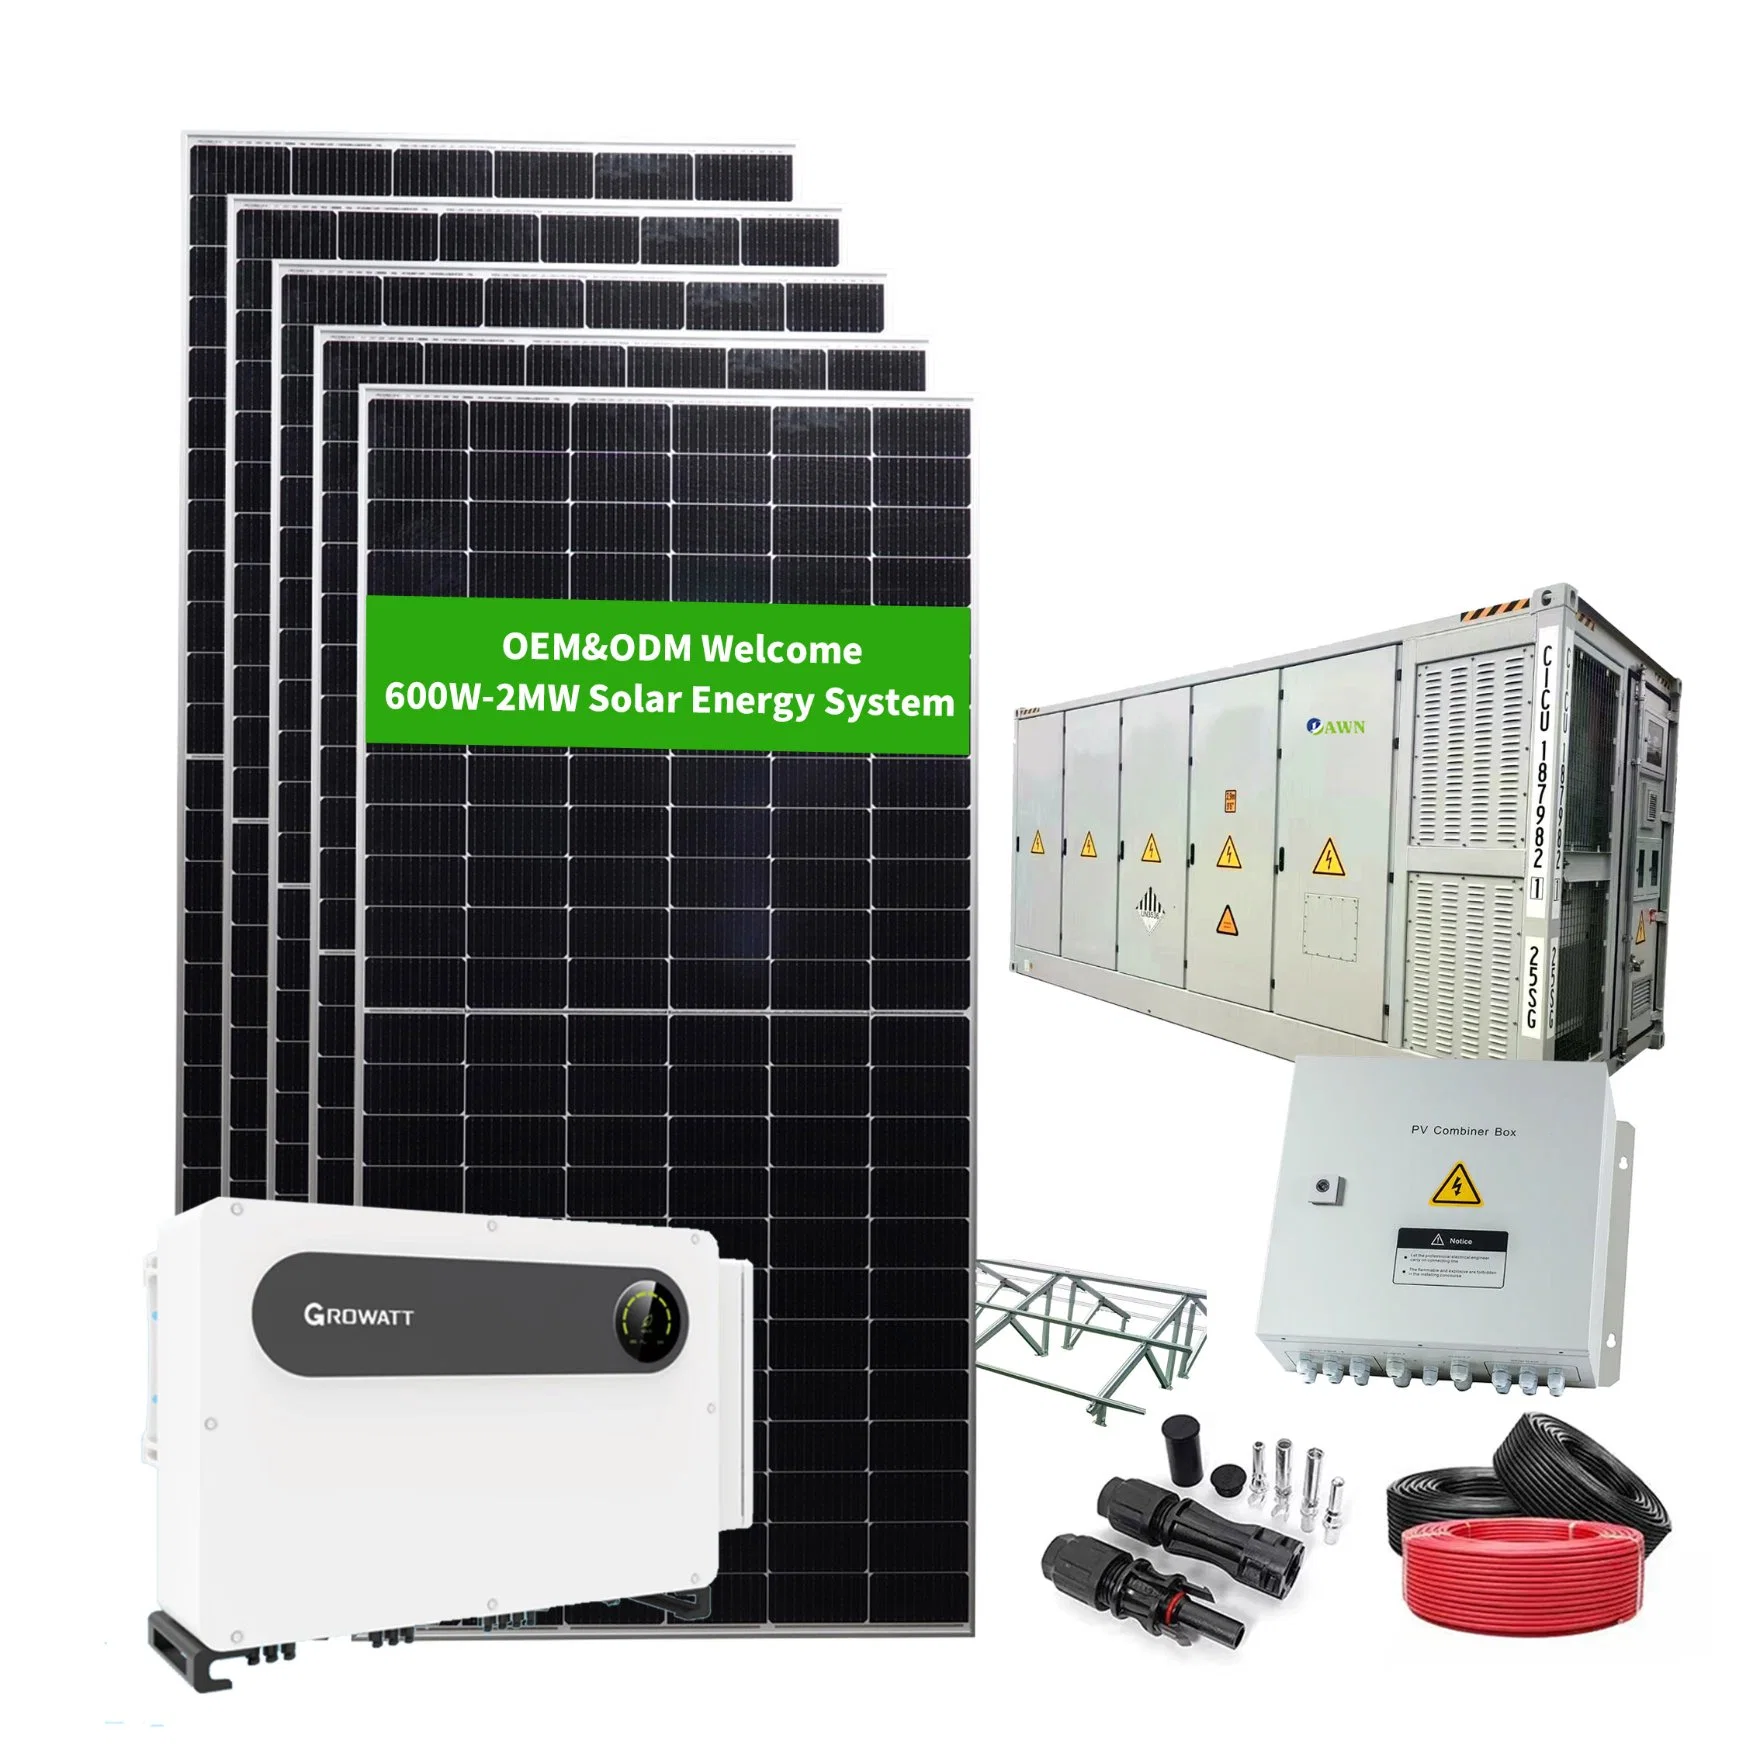 400kw Solar Panel Power Energy Storage and Large Scale Battery Storage System